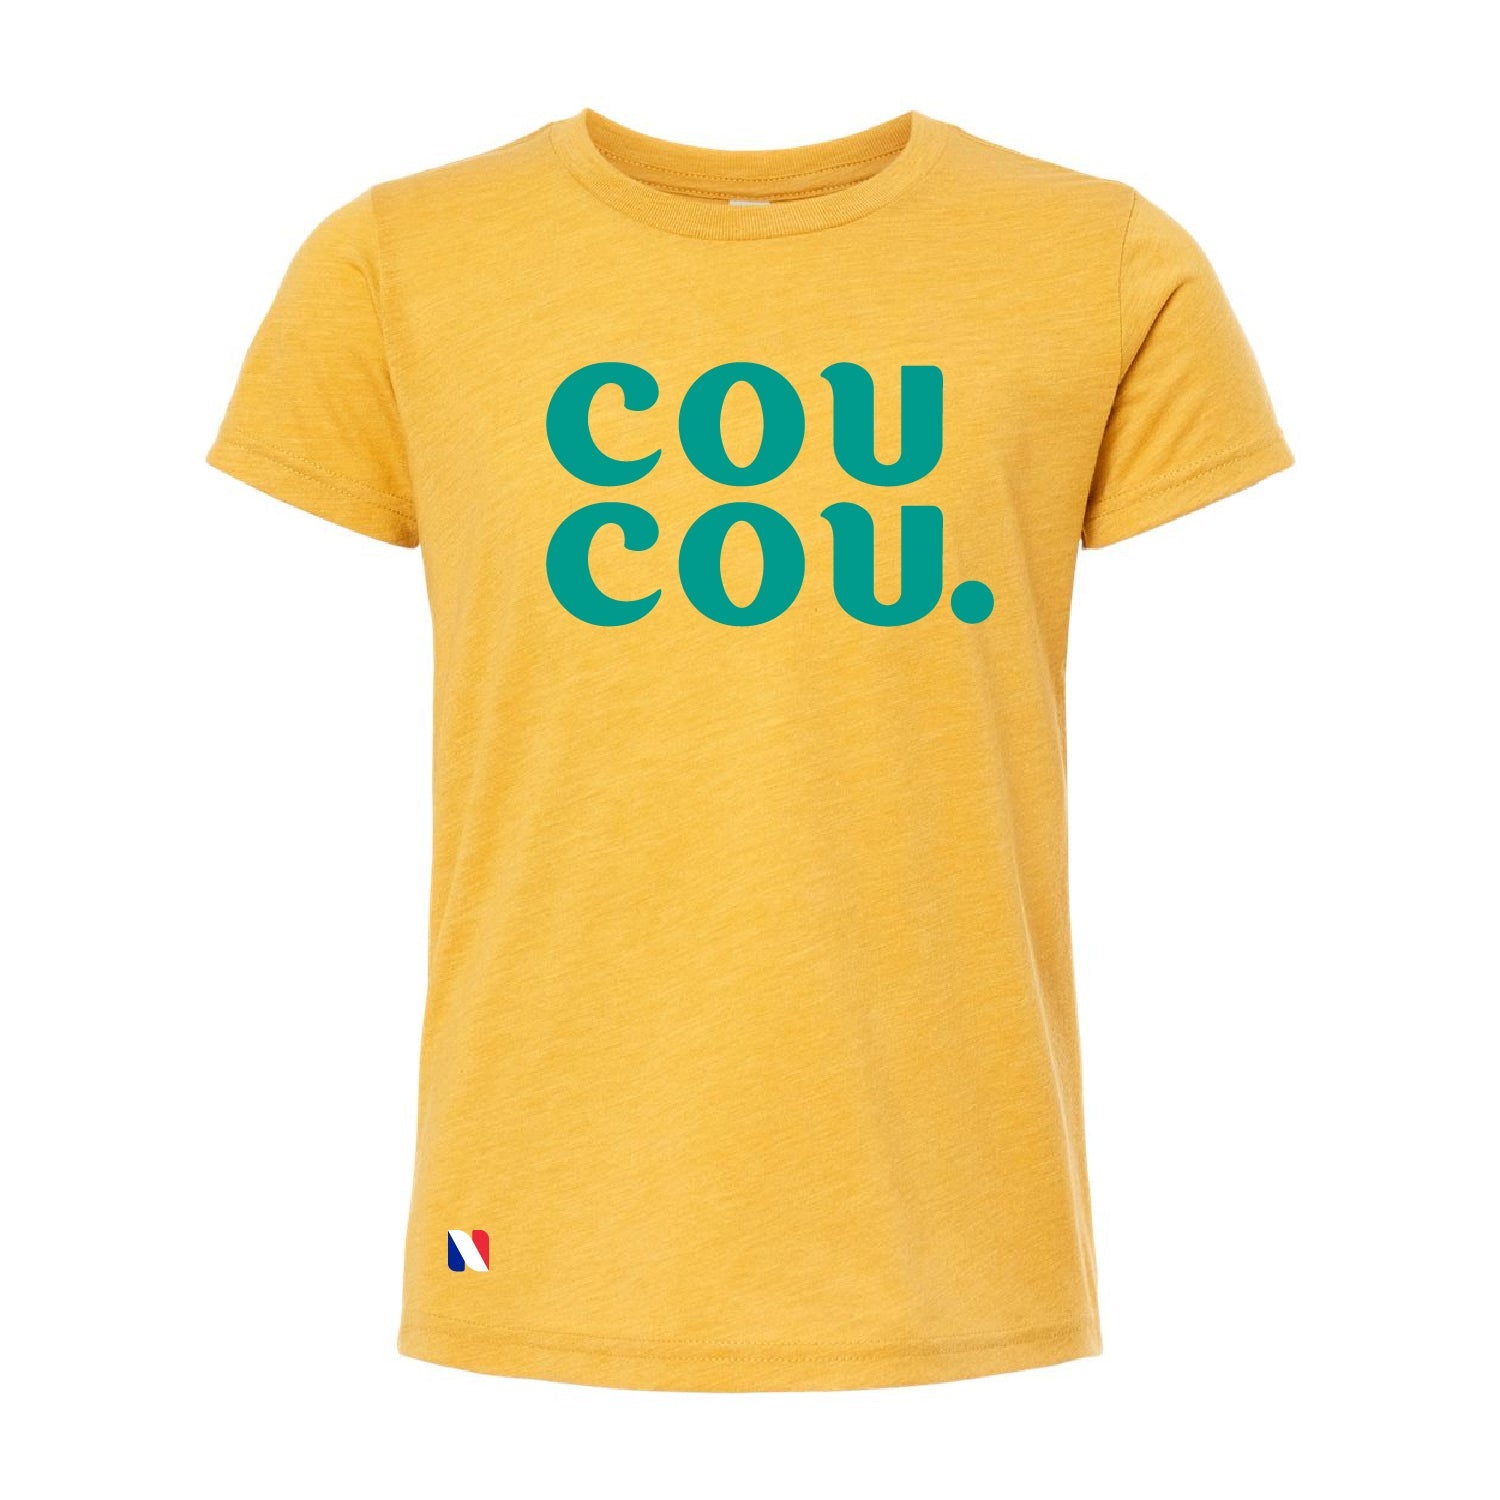 COUCOU - YOUTH TRIBLEND TEE - DSP On Demand